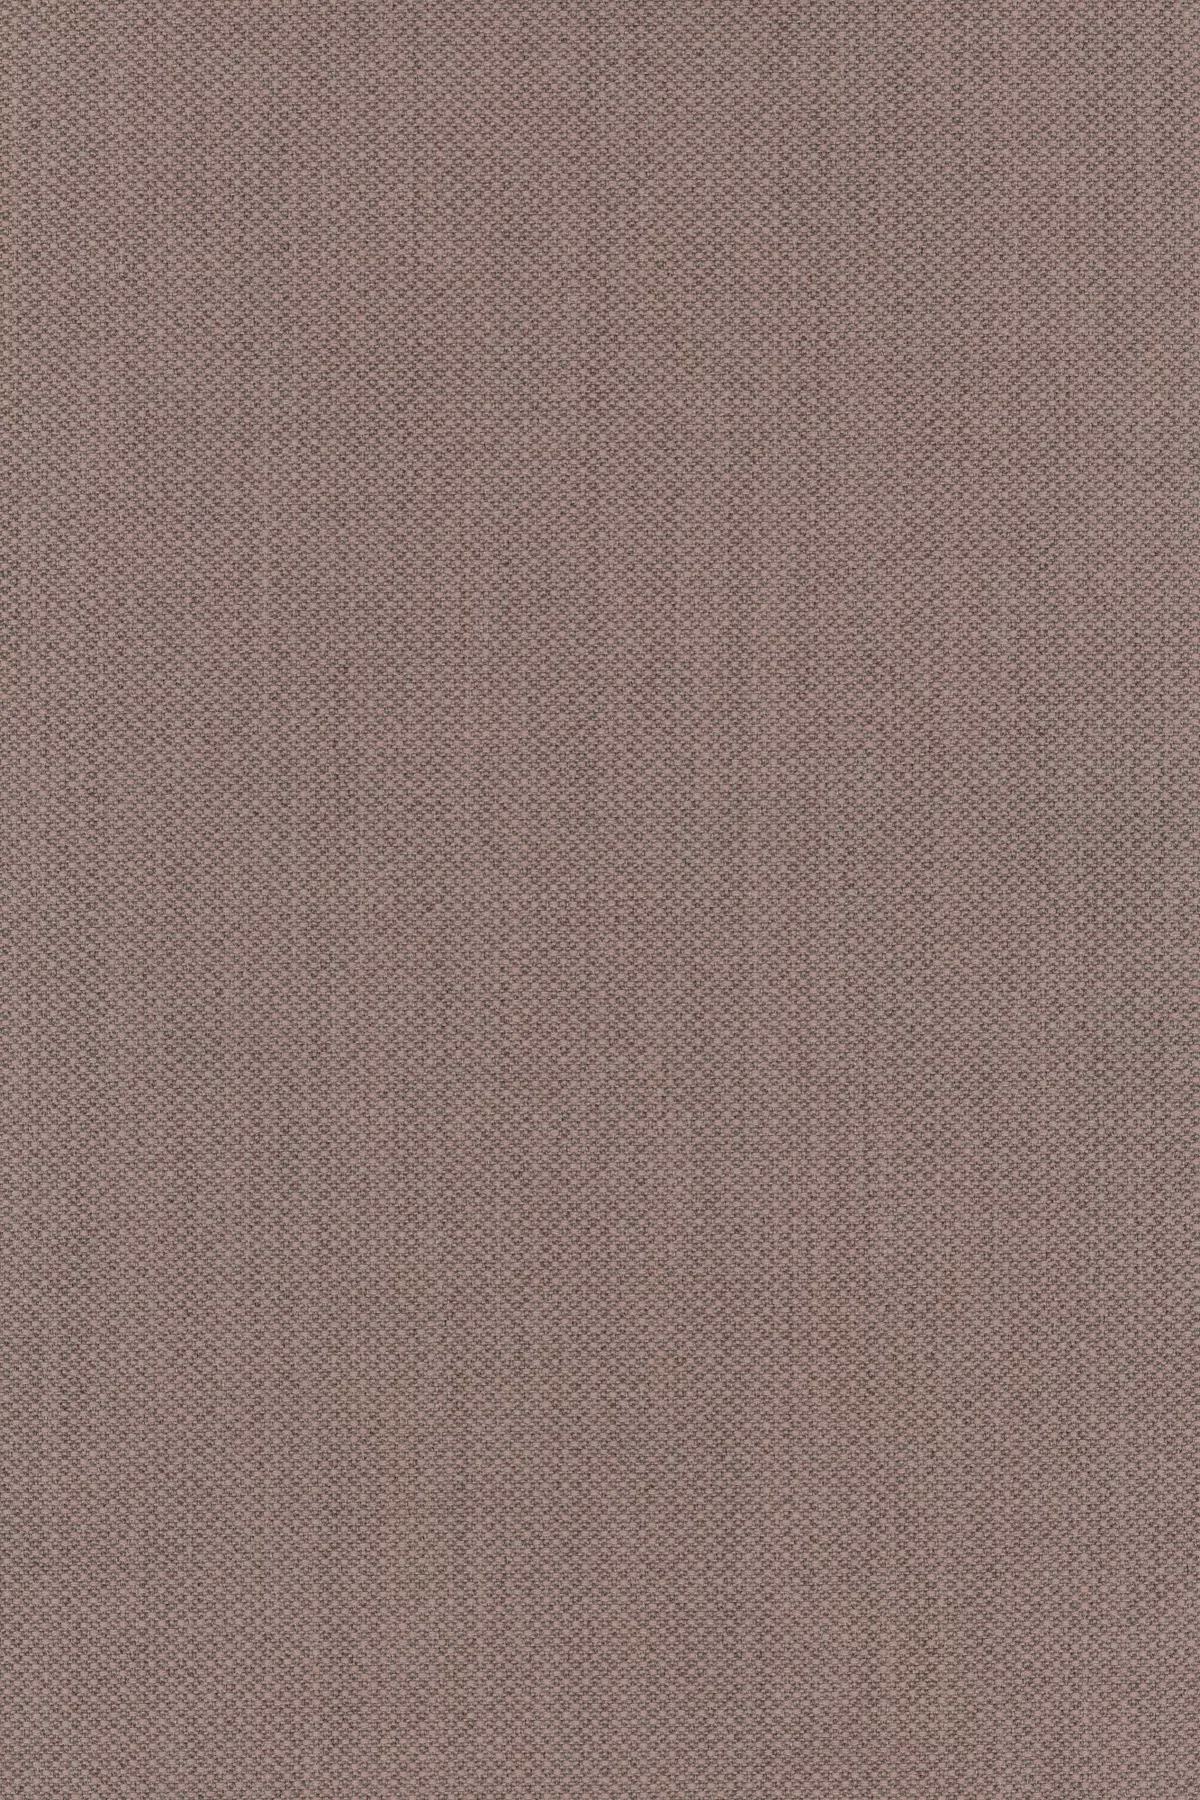 Fabric sample Fiord 551 pink